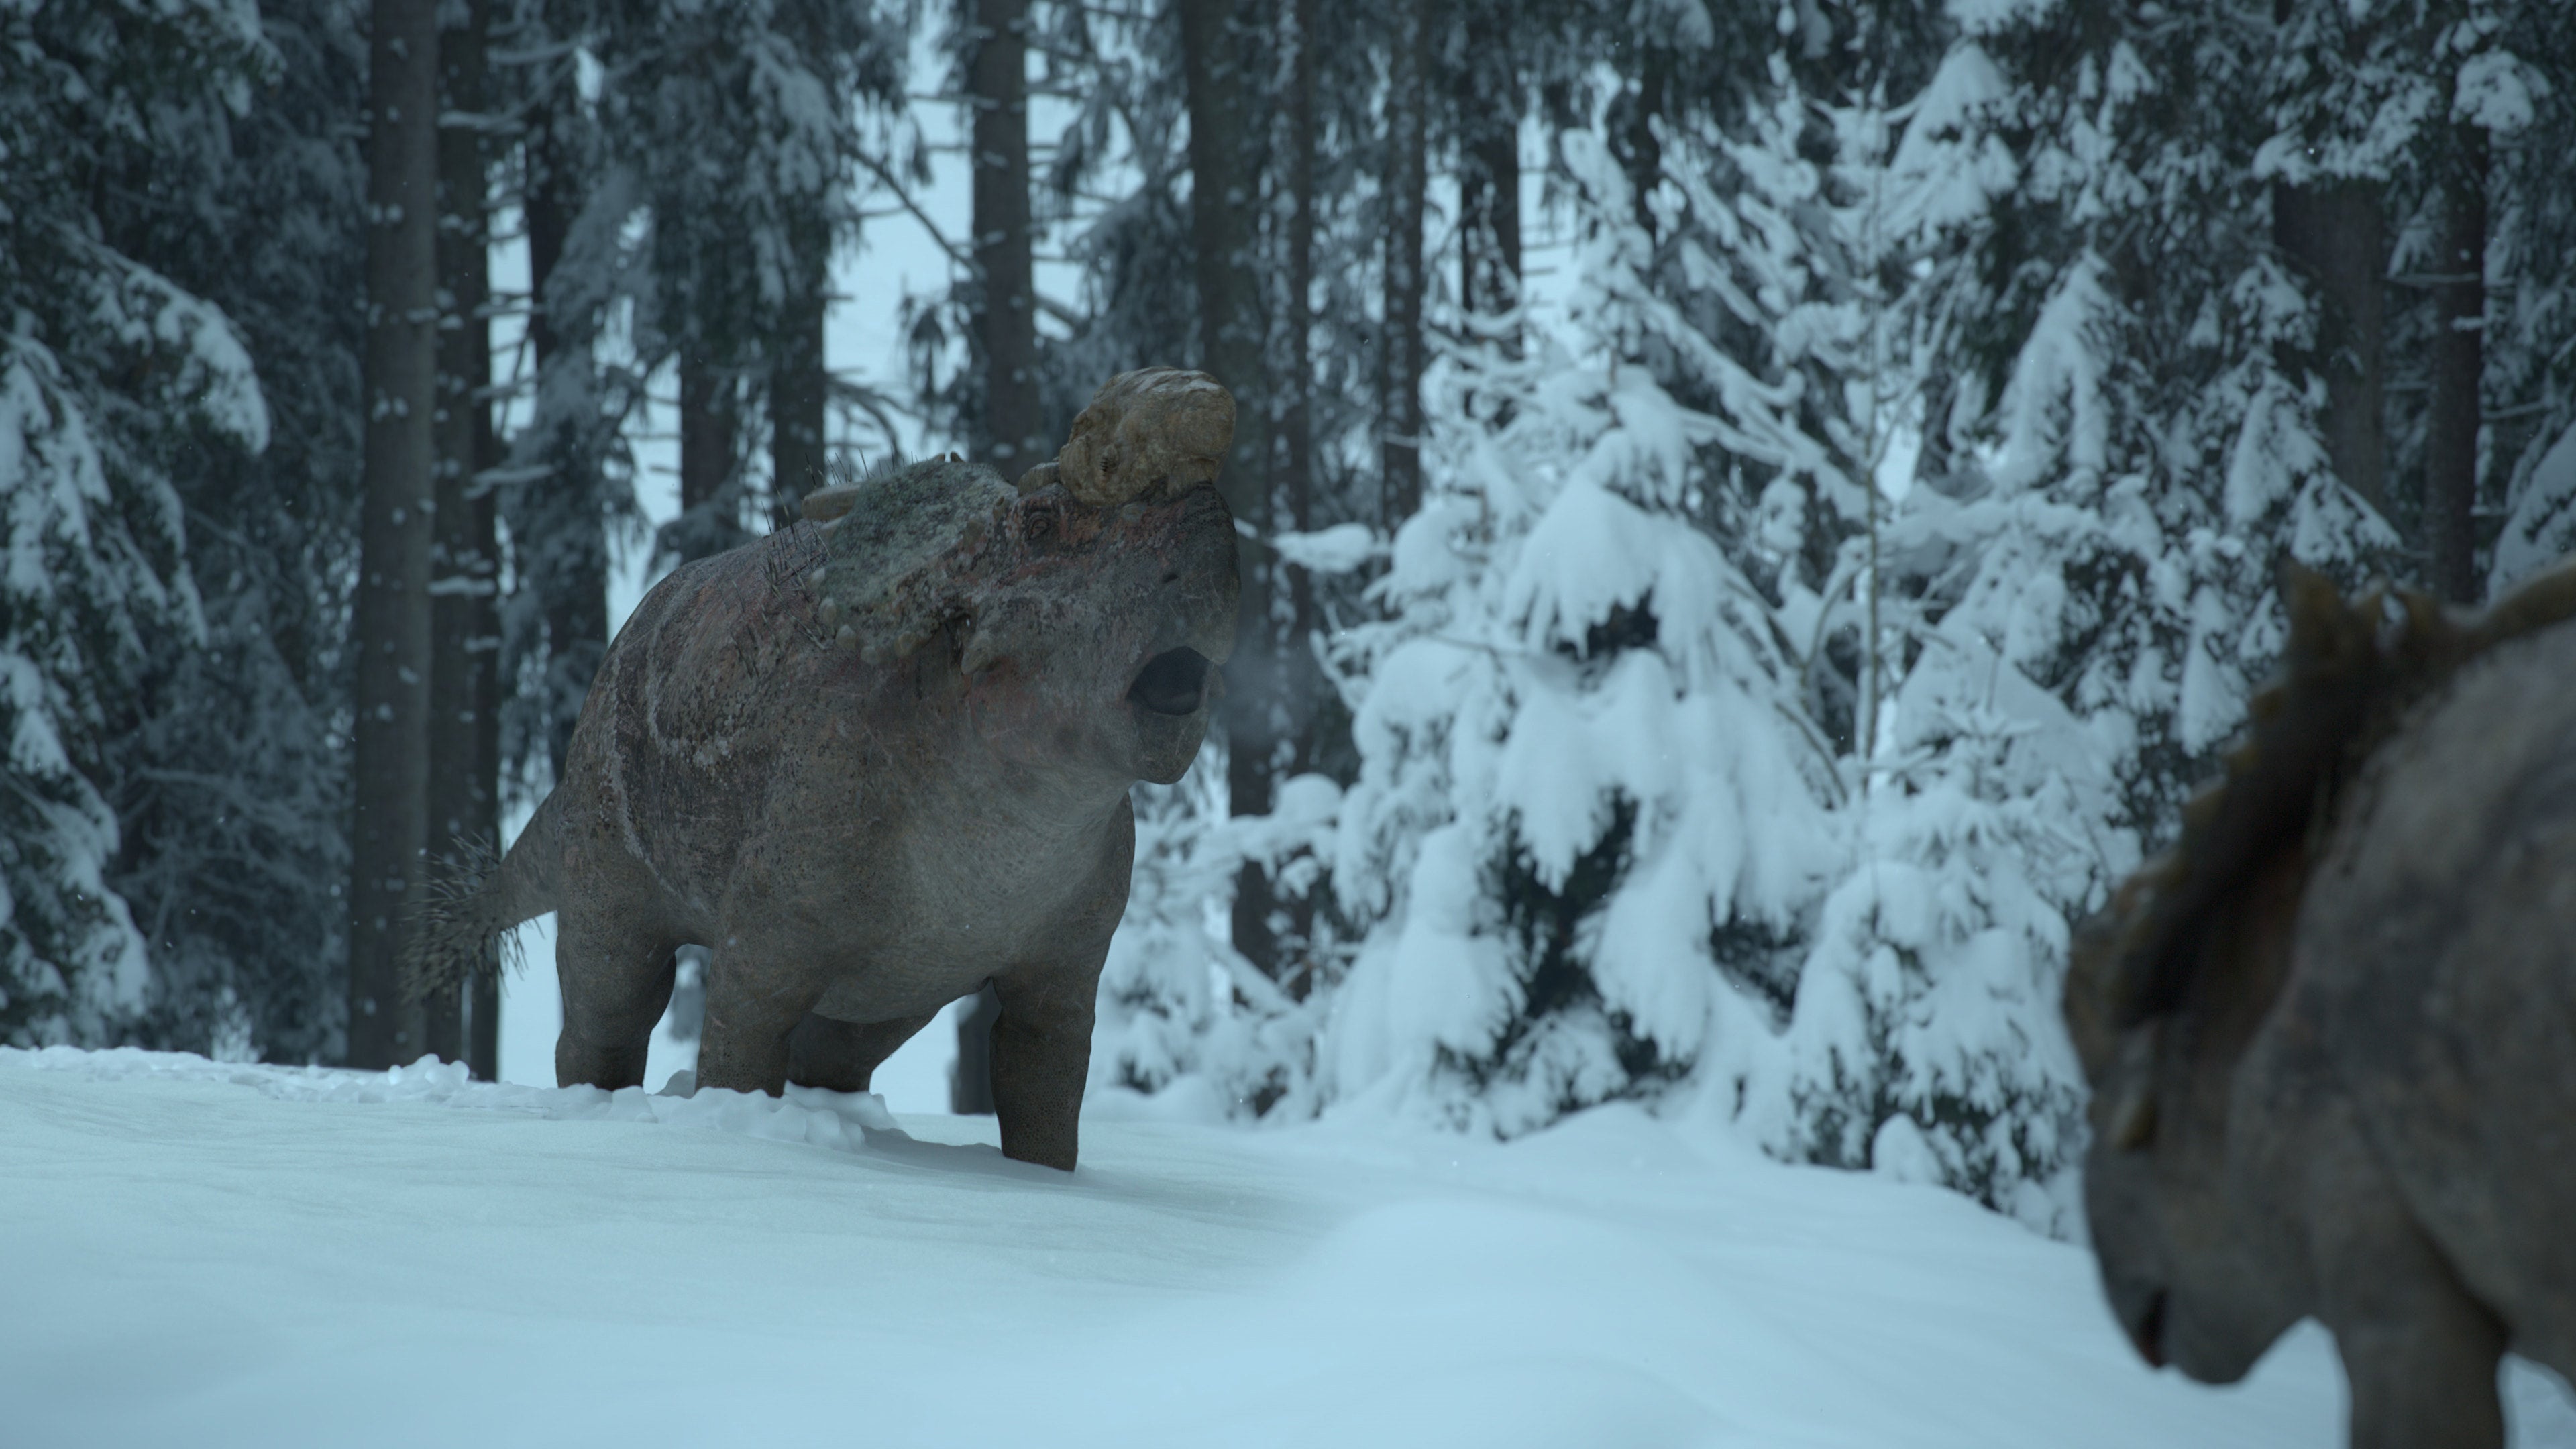 Two Pachyrhinosaurs square up in the snow. (Image: Apple)